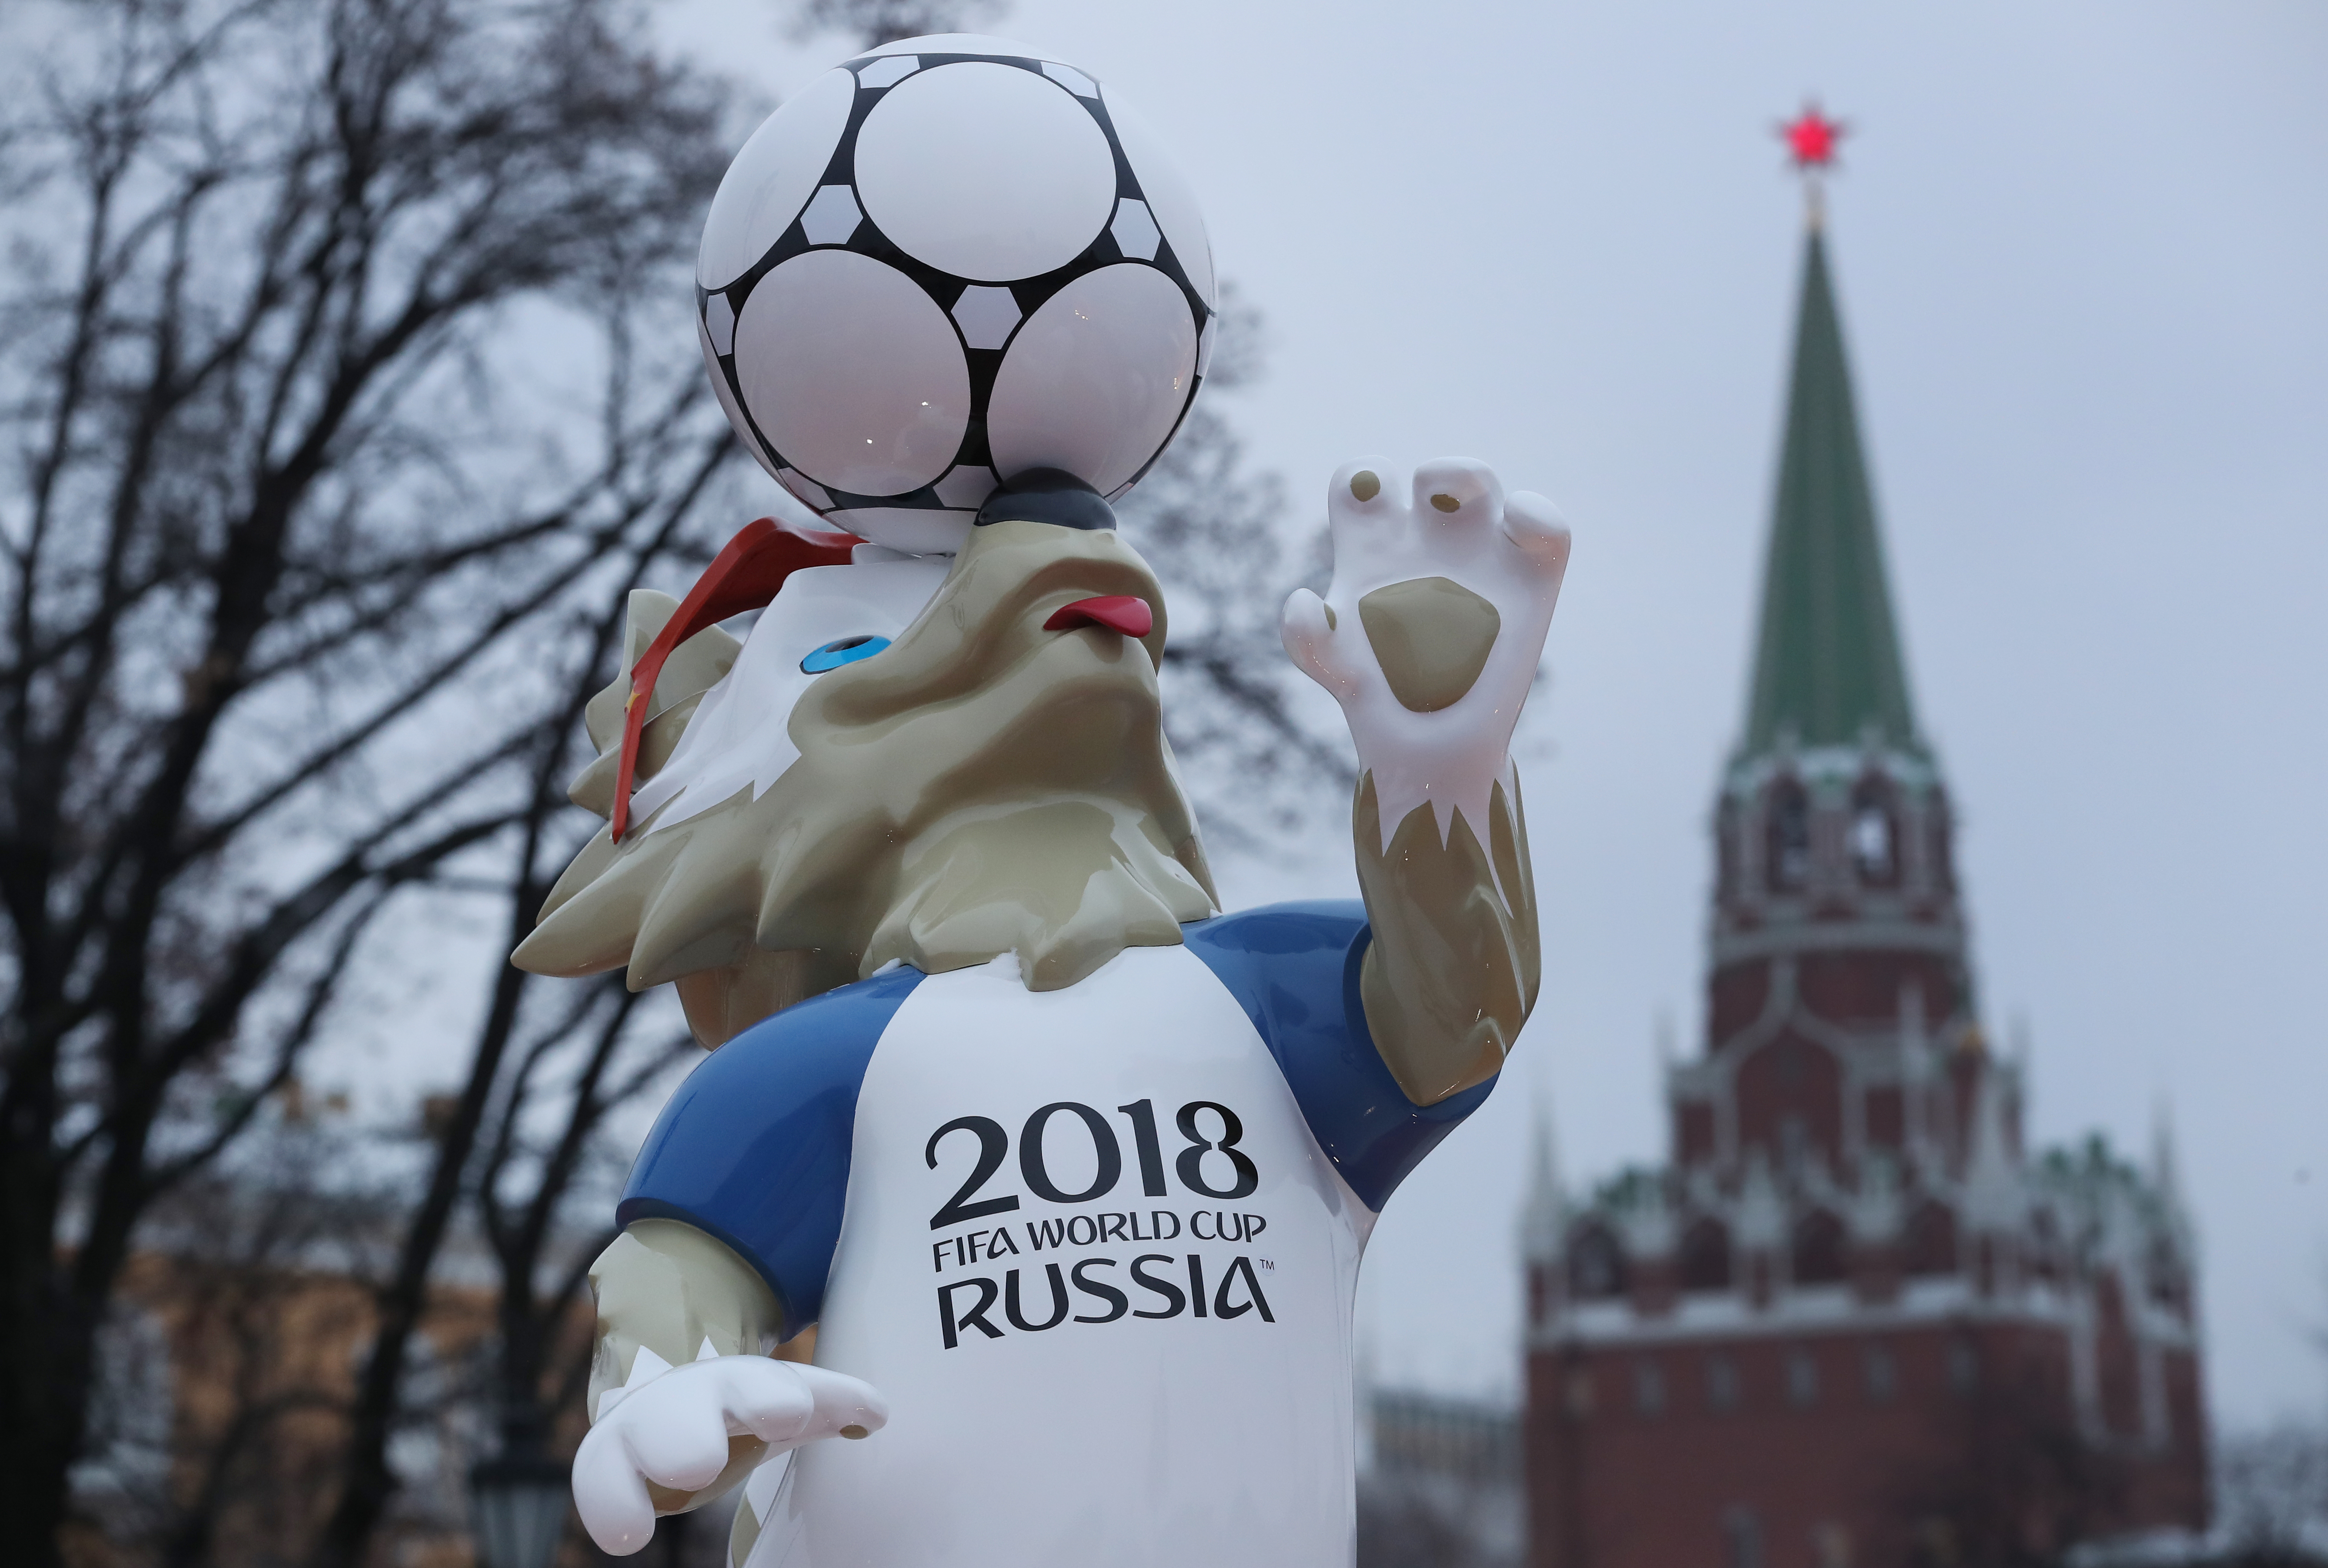 The 2018 World Cup mascot